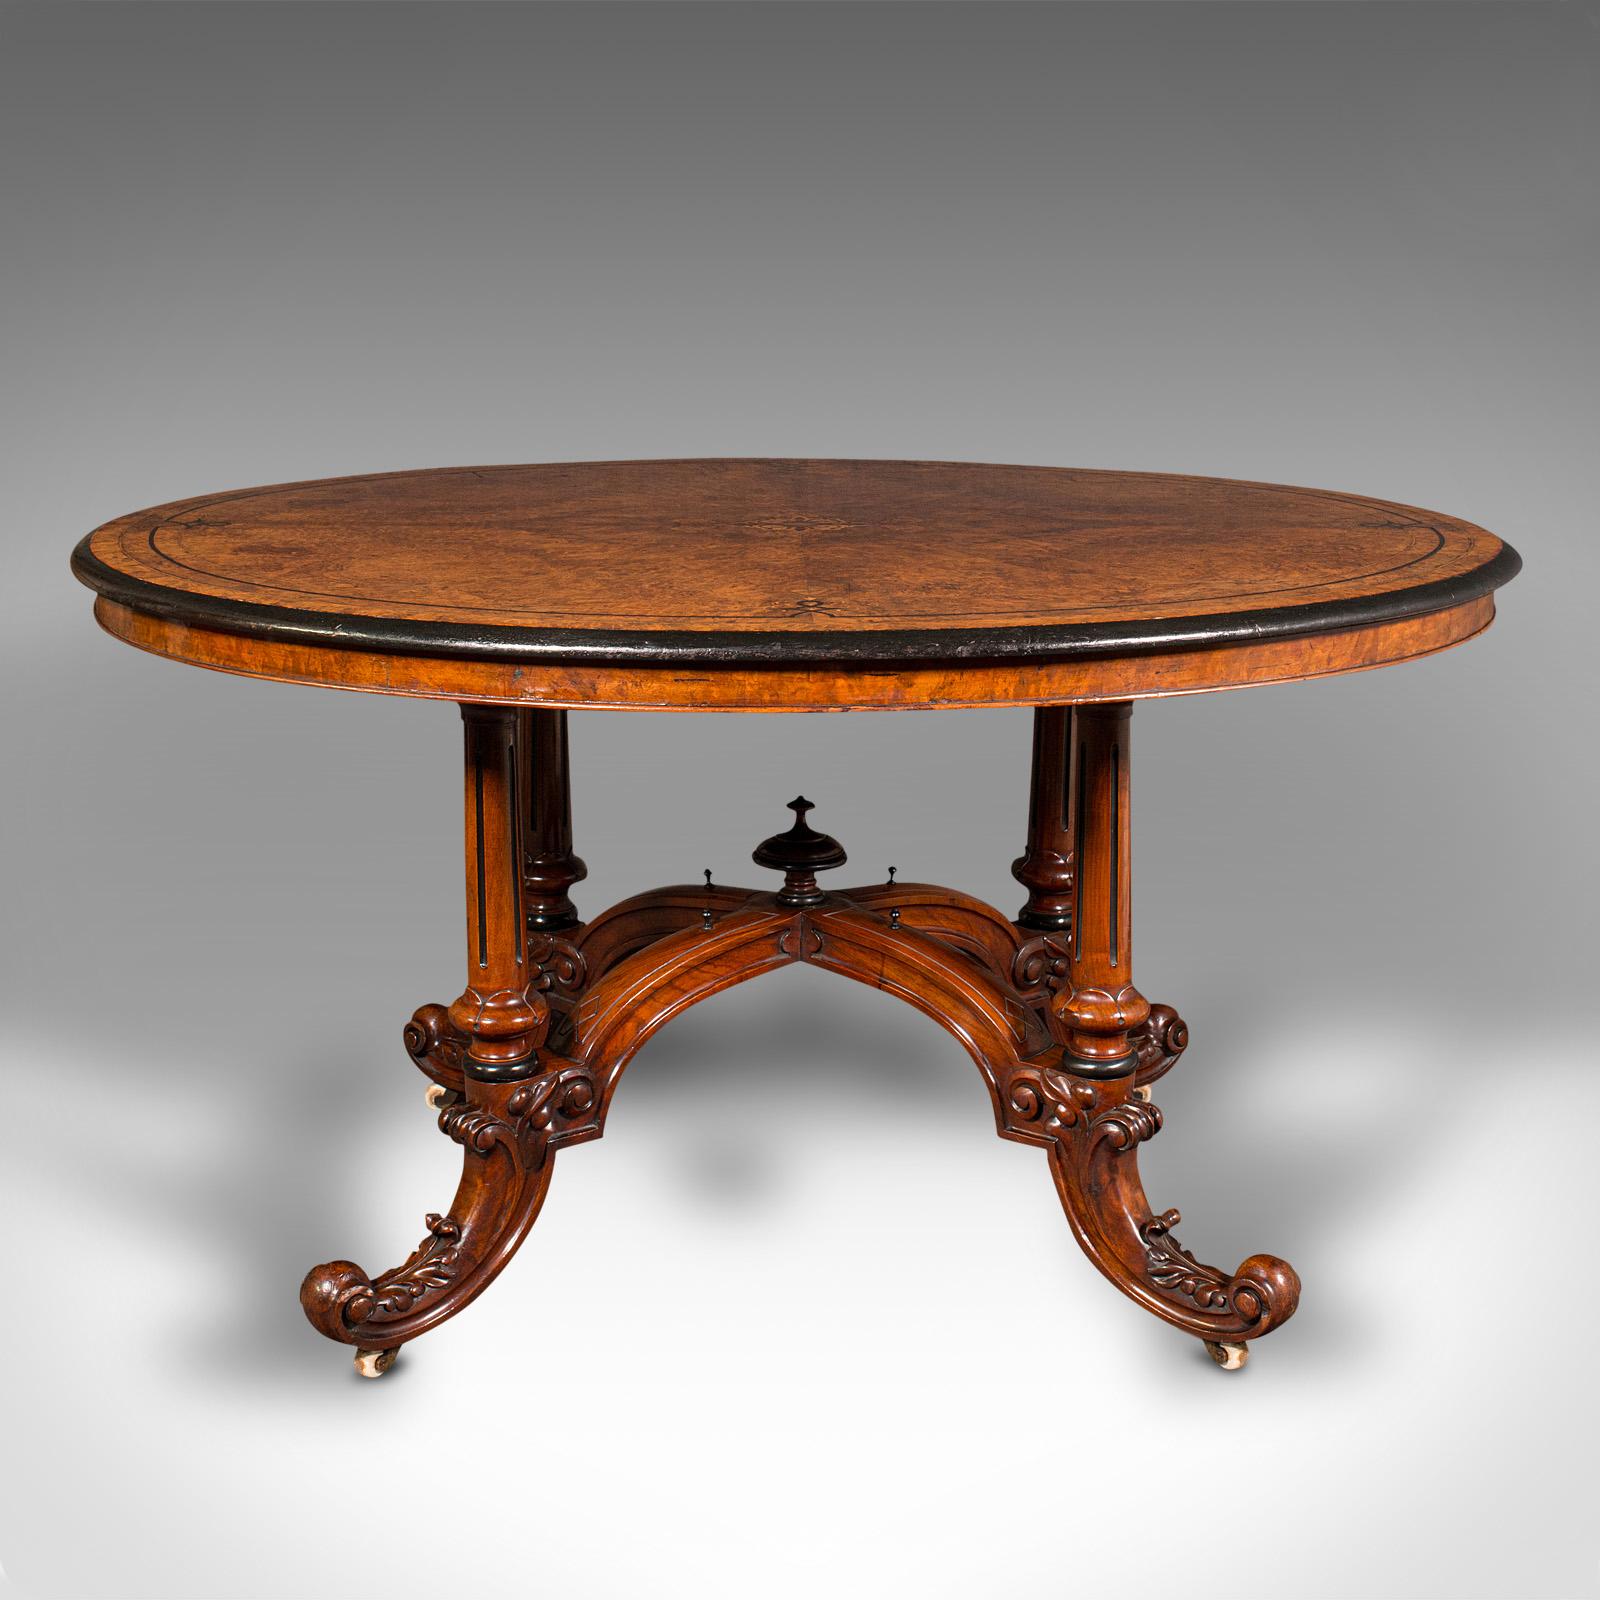 19th Century Antique Oval Looe Table, English, Walnut, 4 Seat, Centrepiece, Early Victorian For Sale